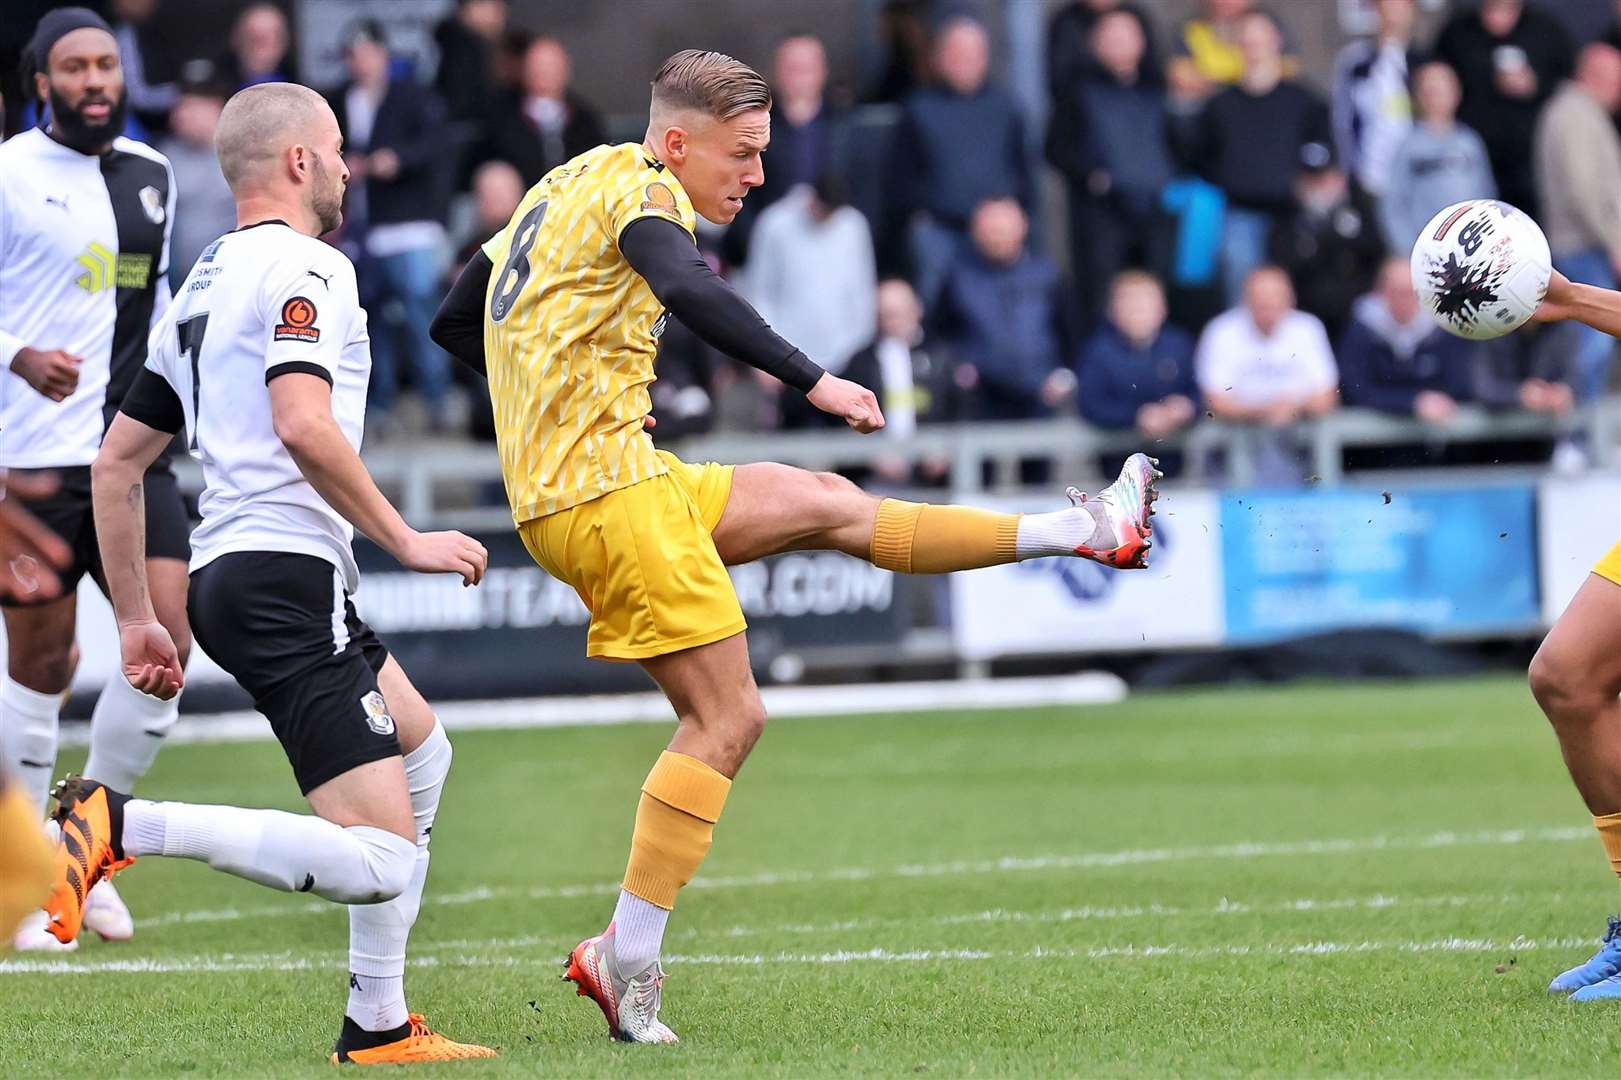 Sam Corne plays the ball forward for Maidstone. Picture: Helen Cooper